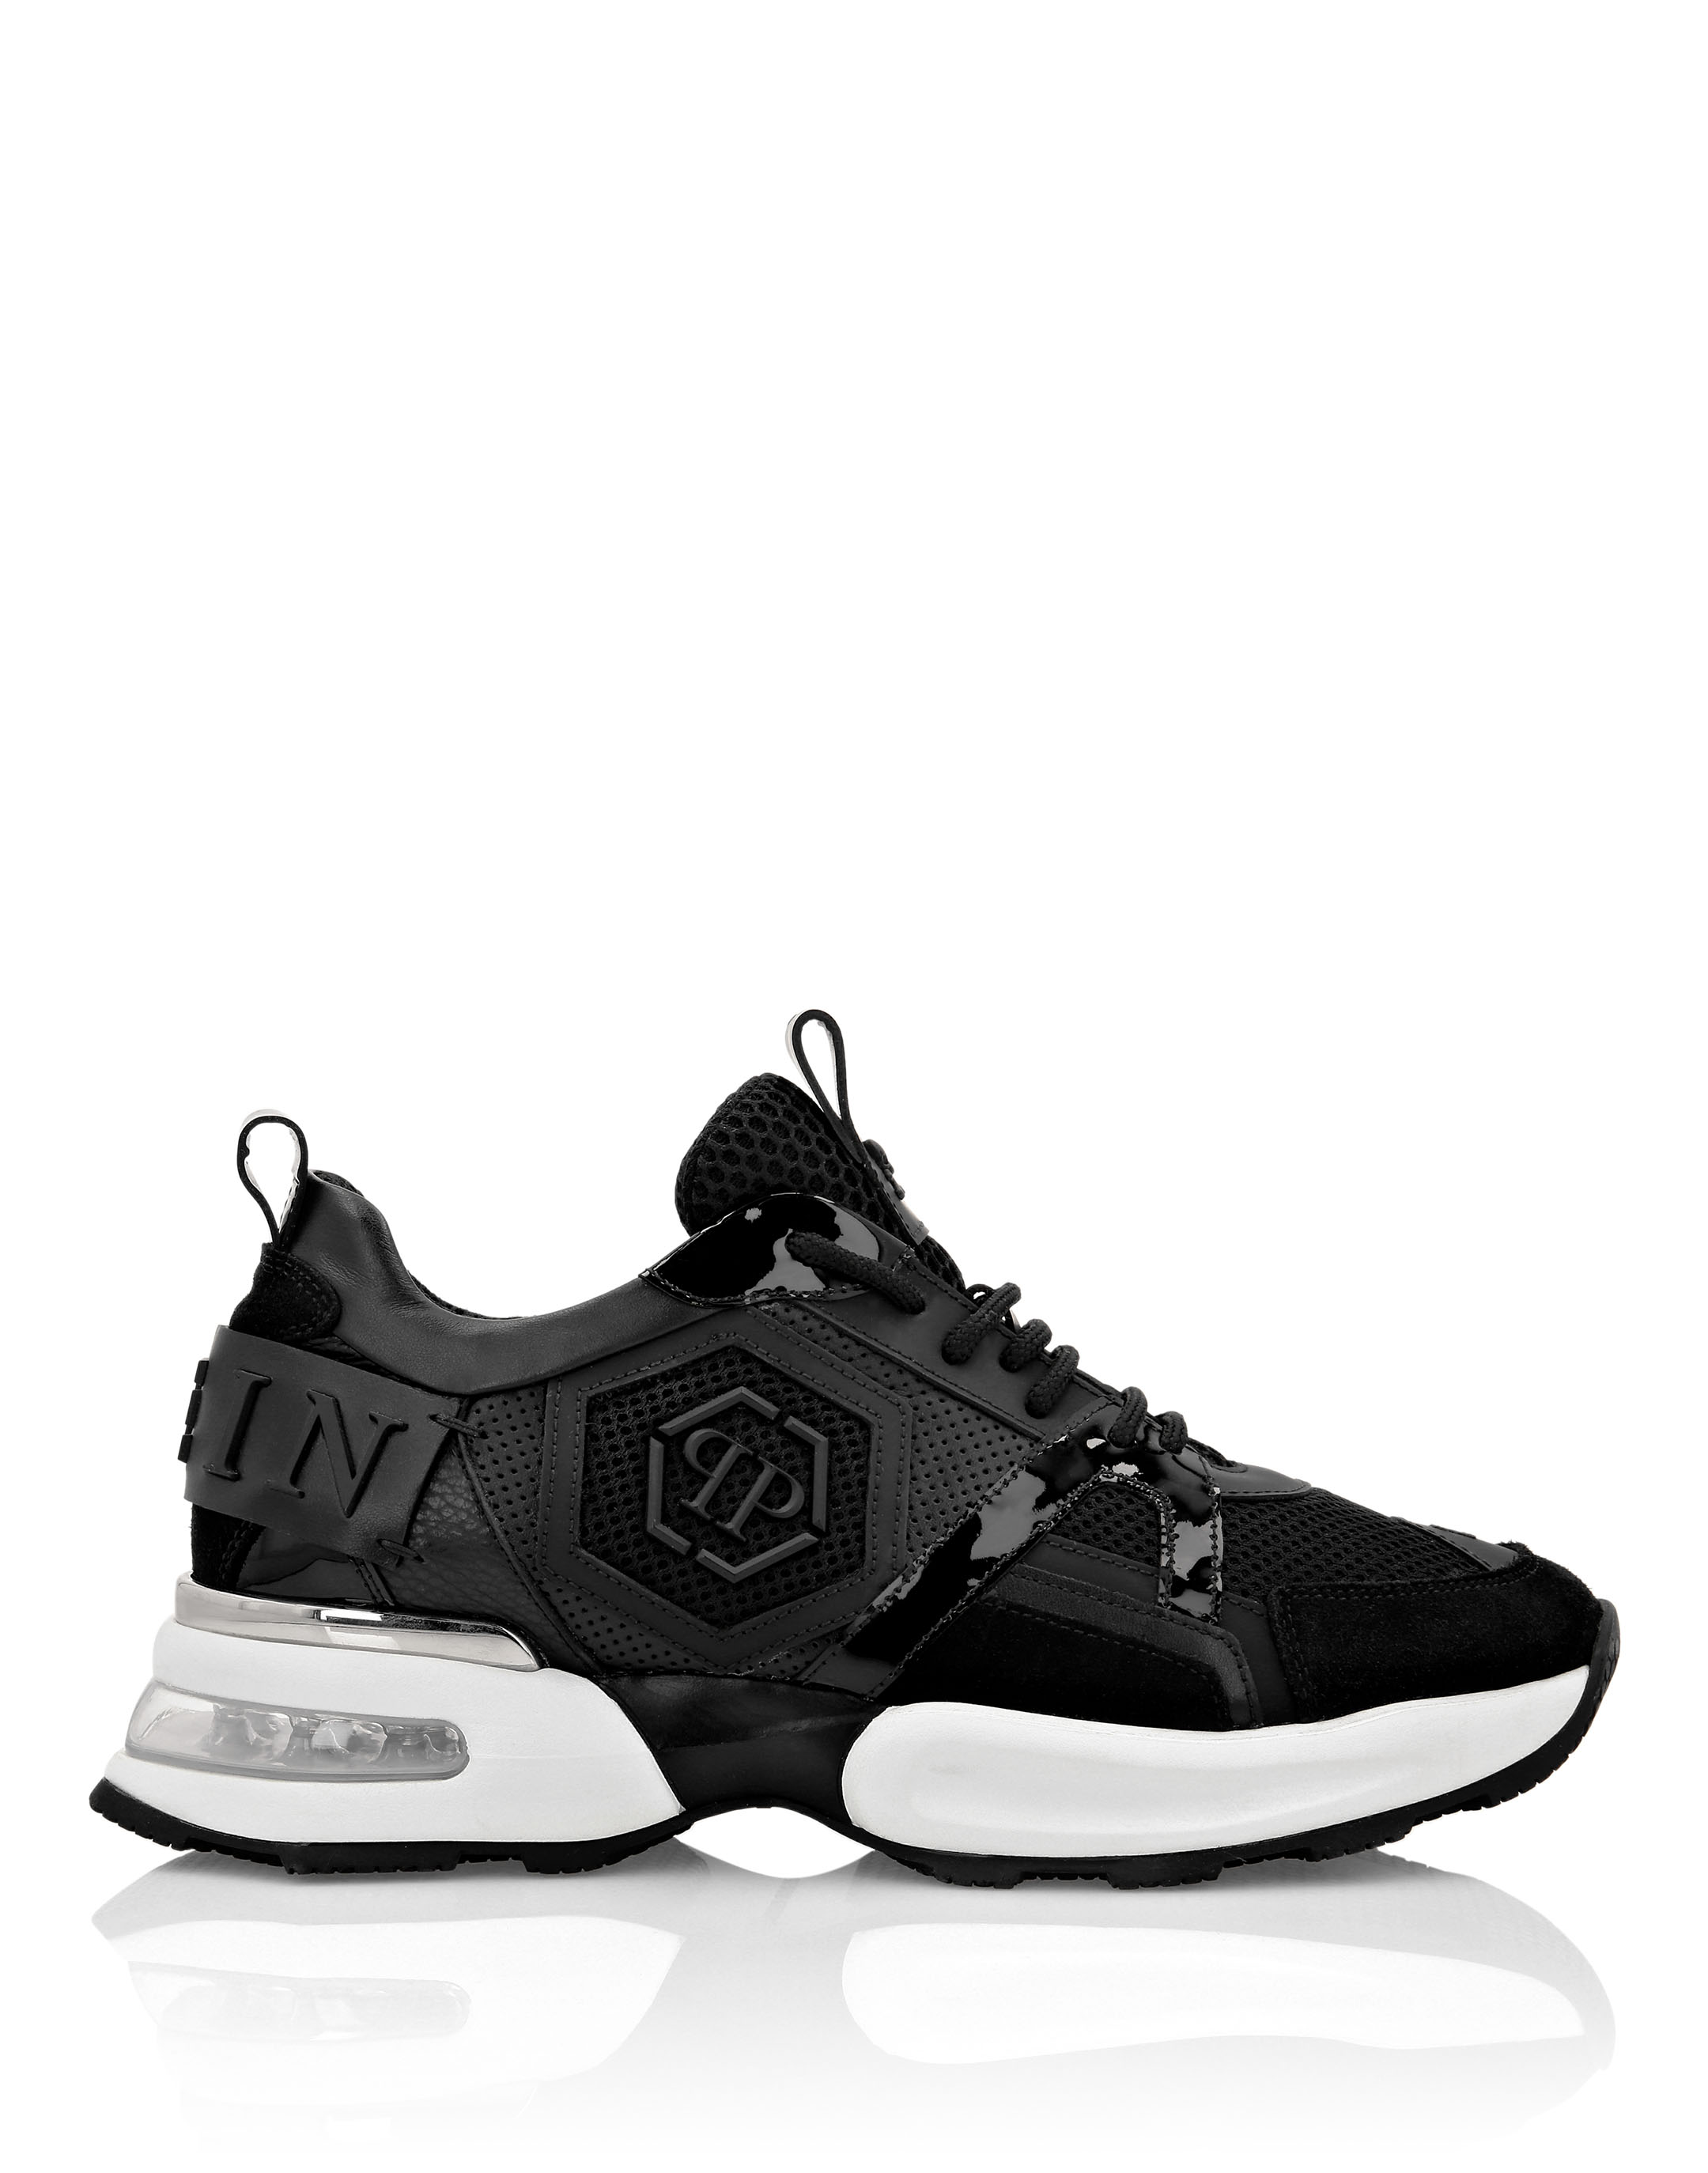 Runner mix materials Supercharged | Philipp Plein Outlet